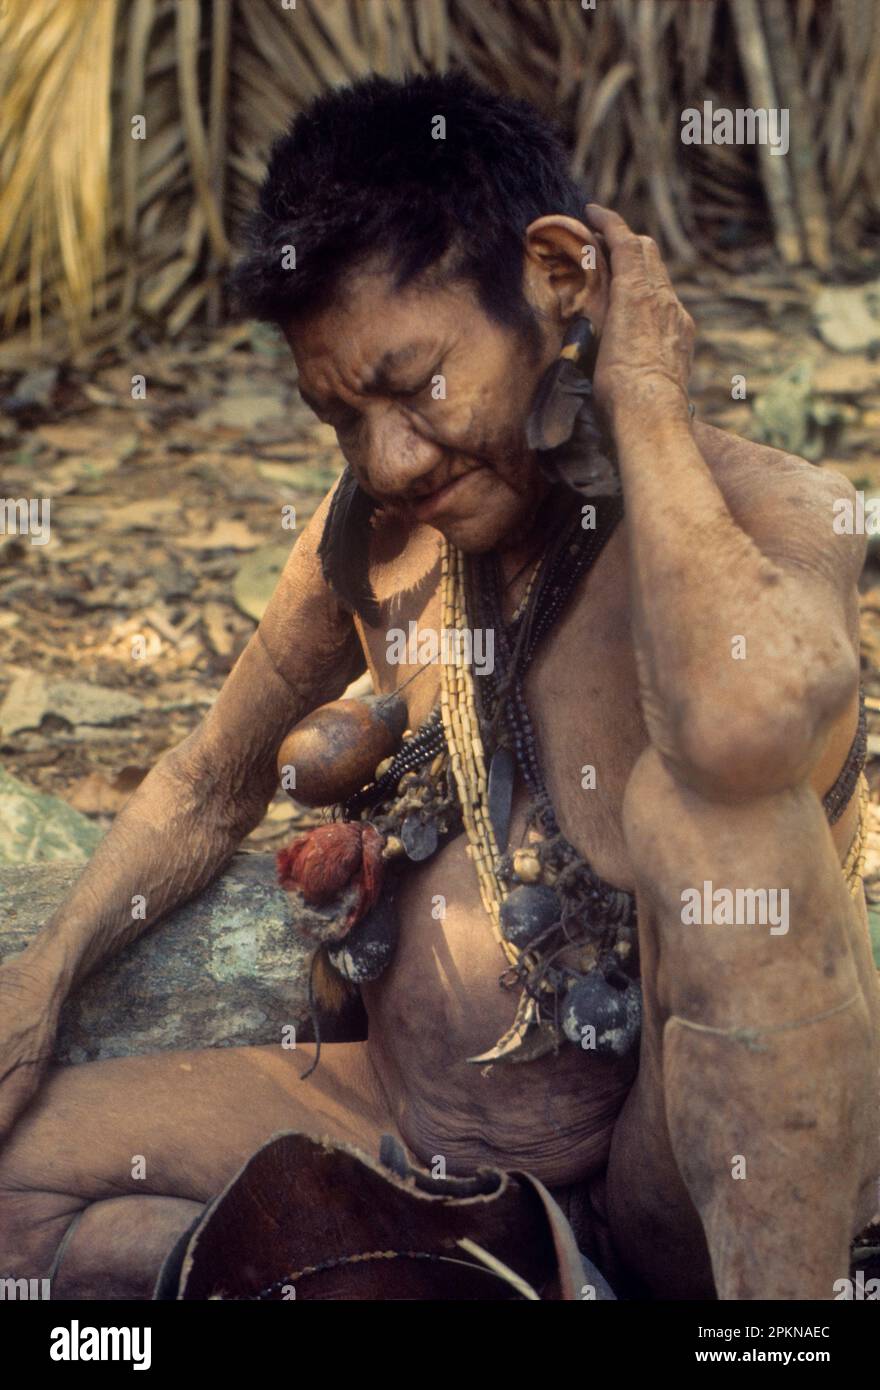 Old woman shaman from Hoti (Hodi) ethnic group. Venezuela, southern Bolívar and northern Amazonas States, foothills of the Sierra de Maigualida, South America. Stock Photo